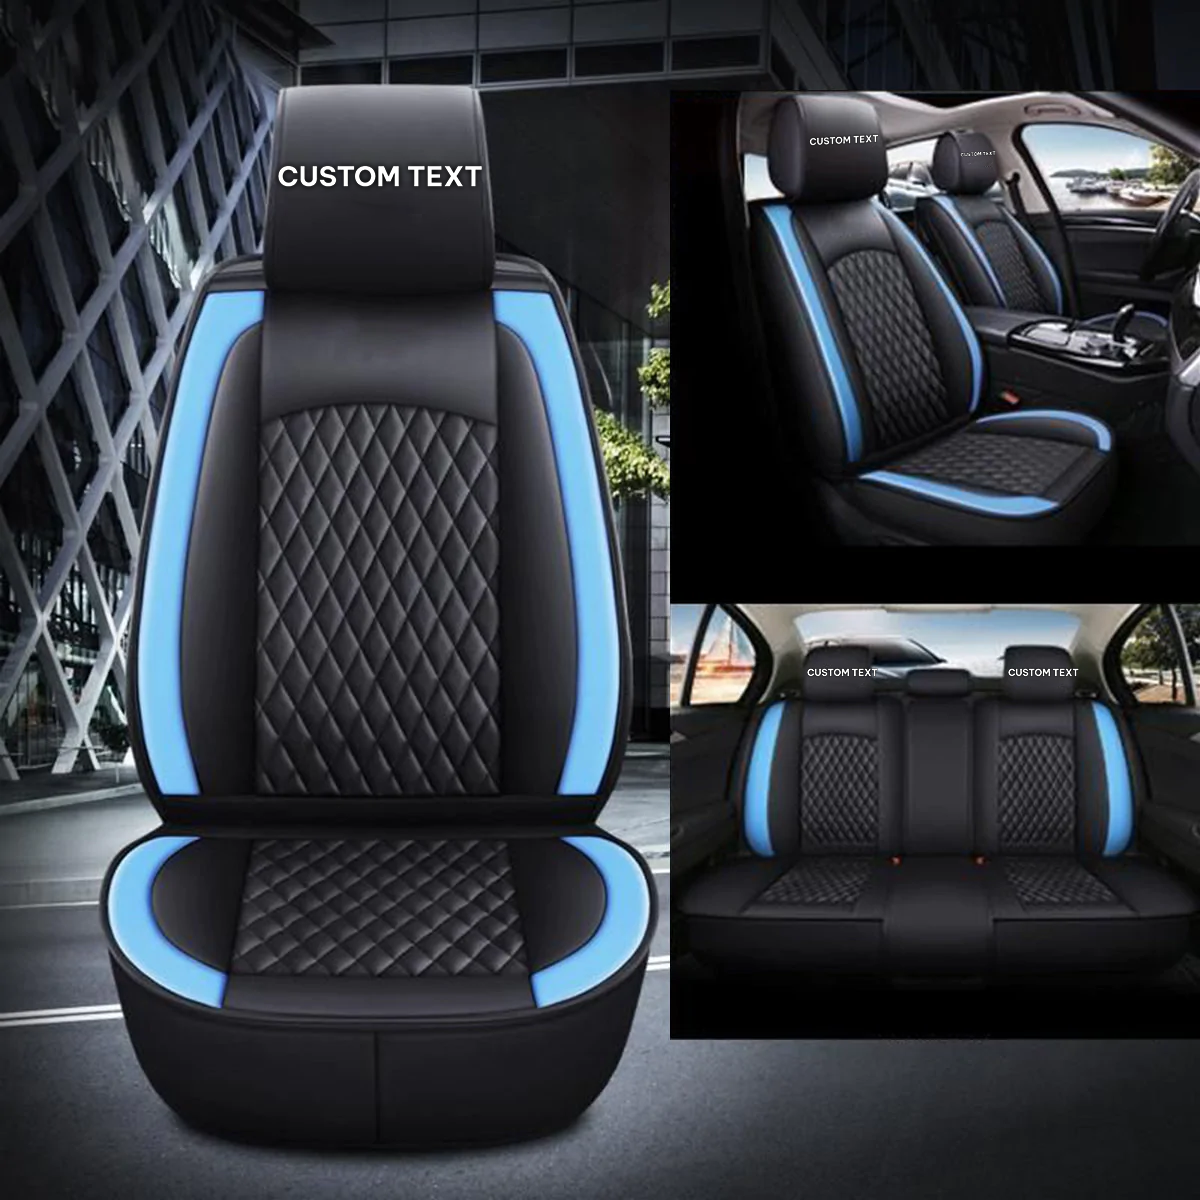 Custom Text For Seat Covers 5 Seats Full Set, Custom Fit For Your Cars, Leatherette Automotive Seat Cushion Protector Universal Fit, Vehicle Auto Interior Decor PU13988